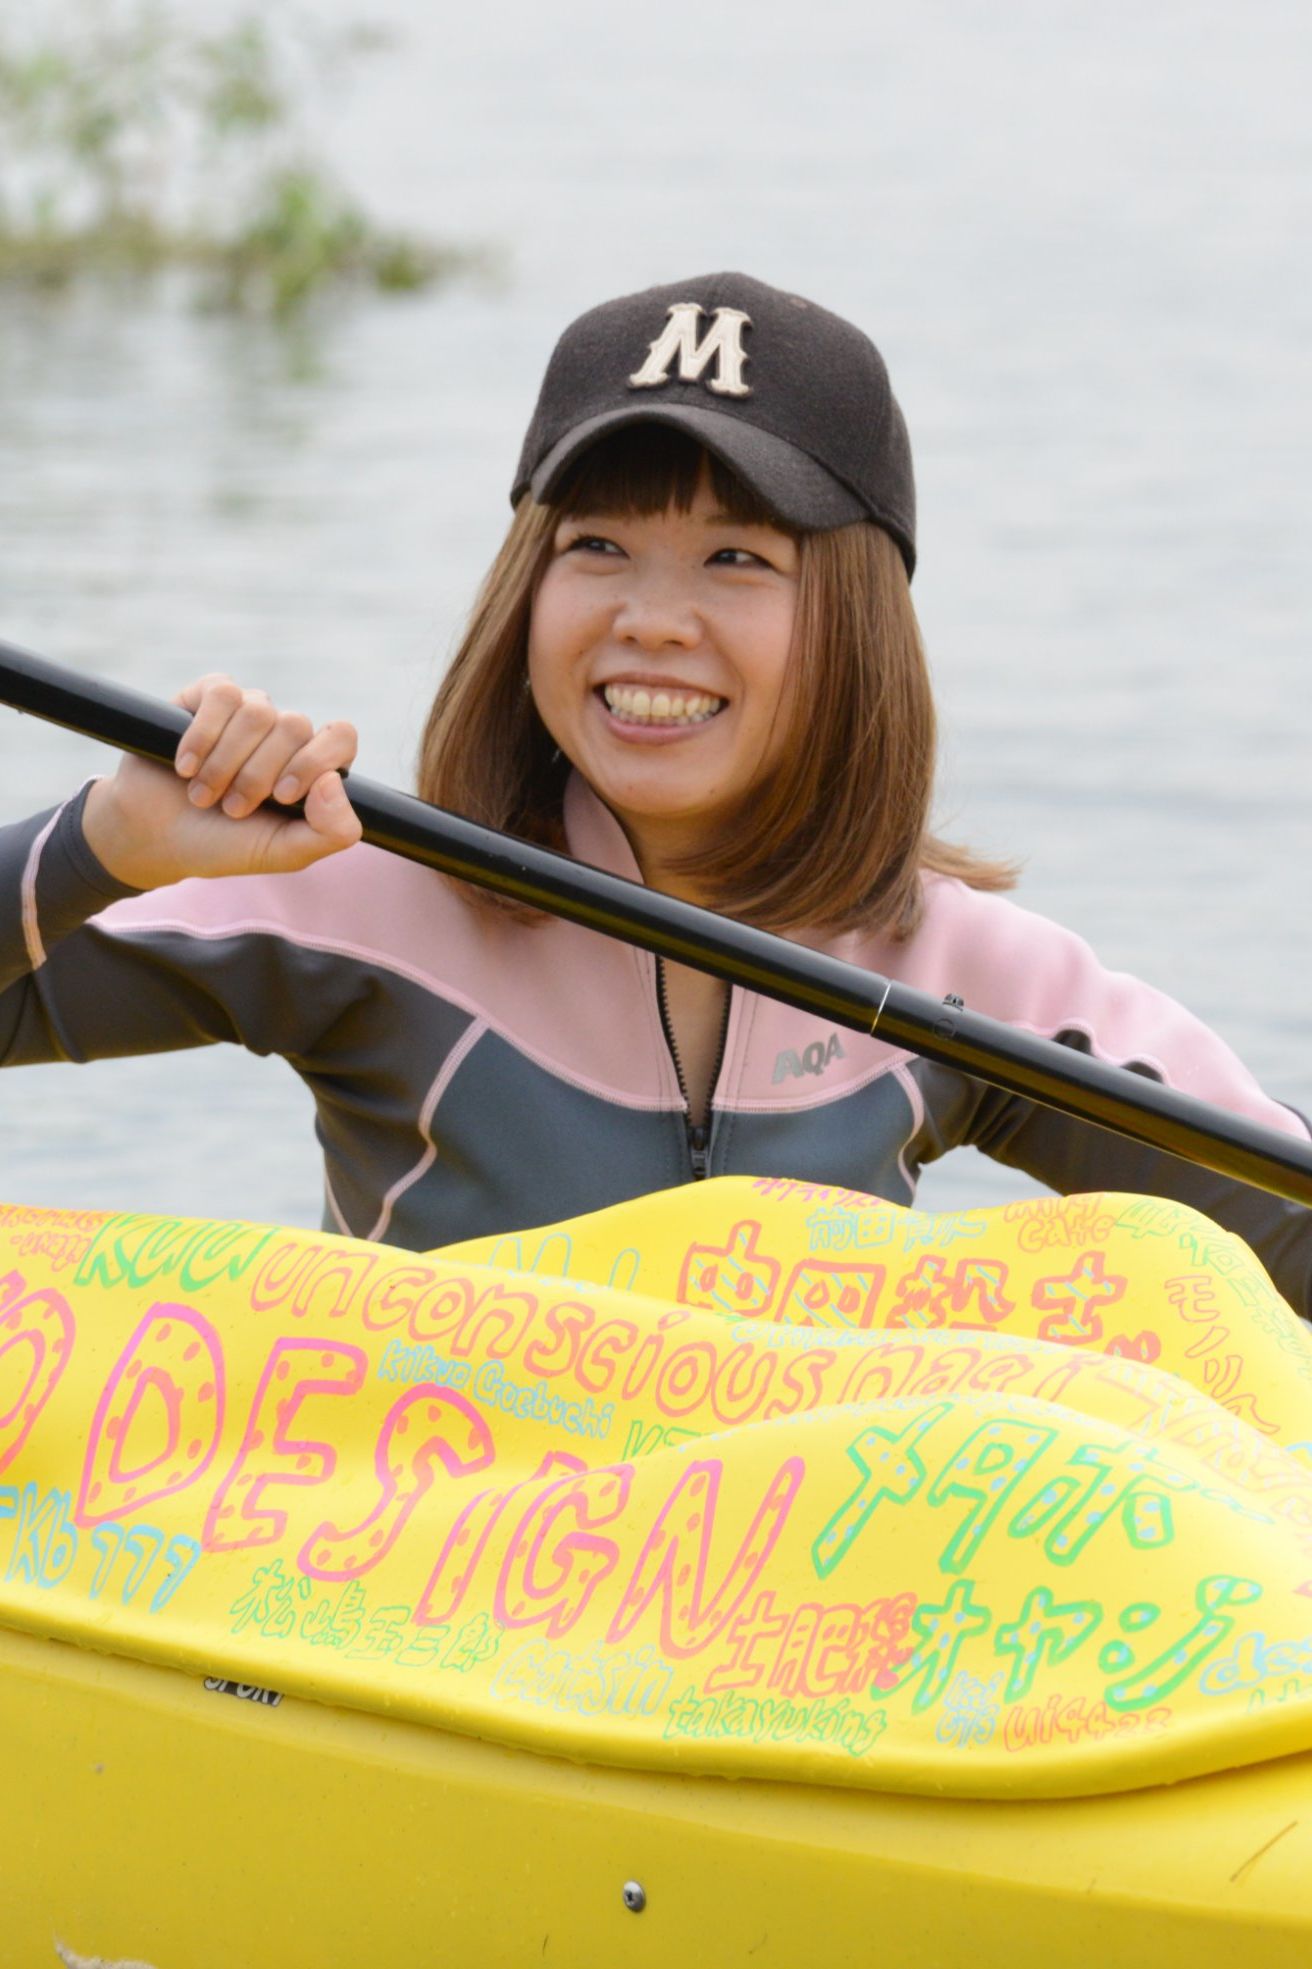 Japanese court: Vagina kayak is legal, sharing is not | CNN